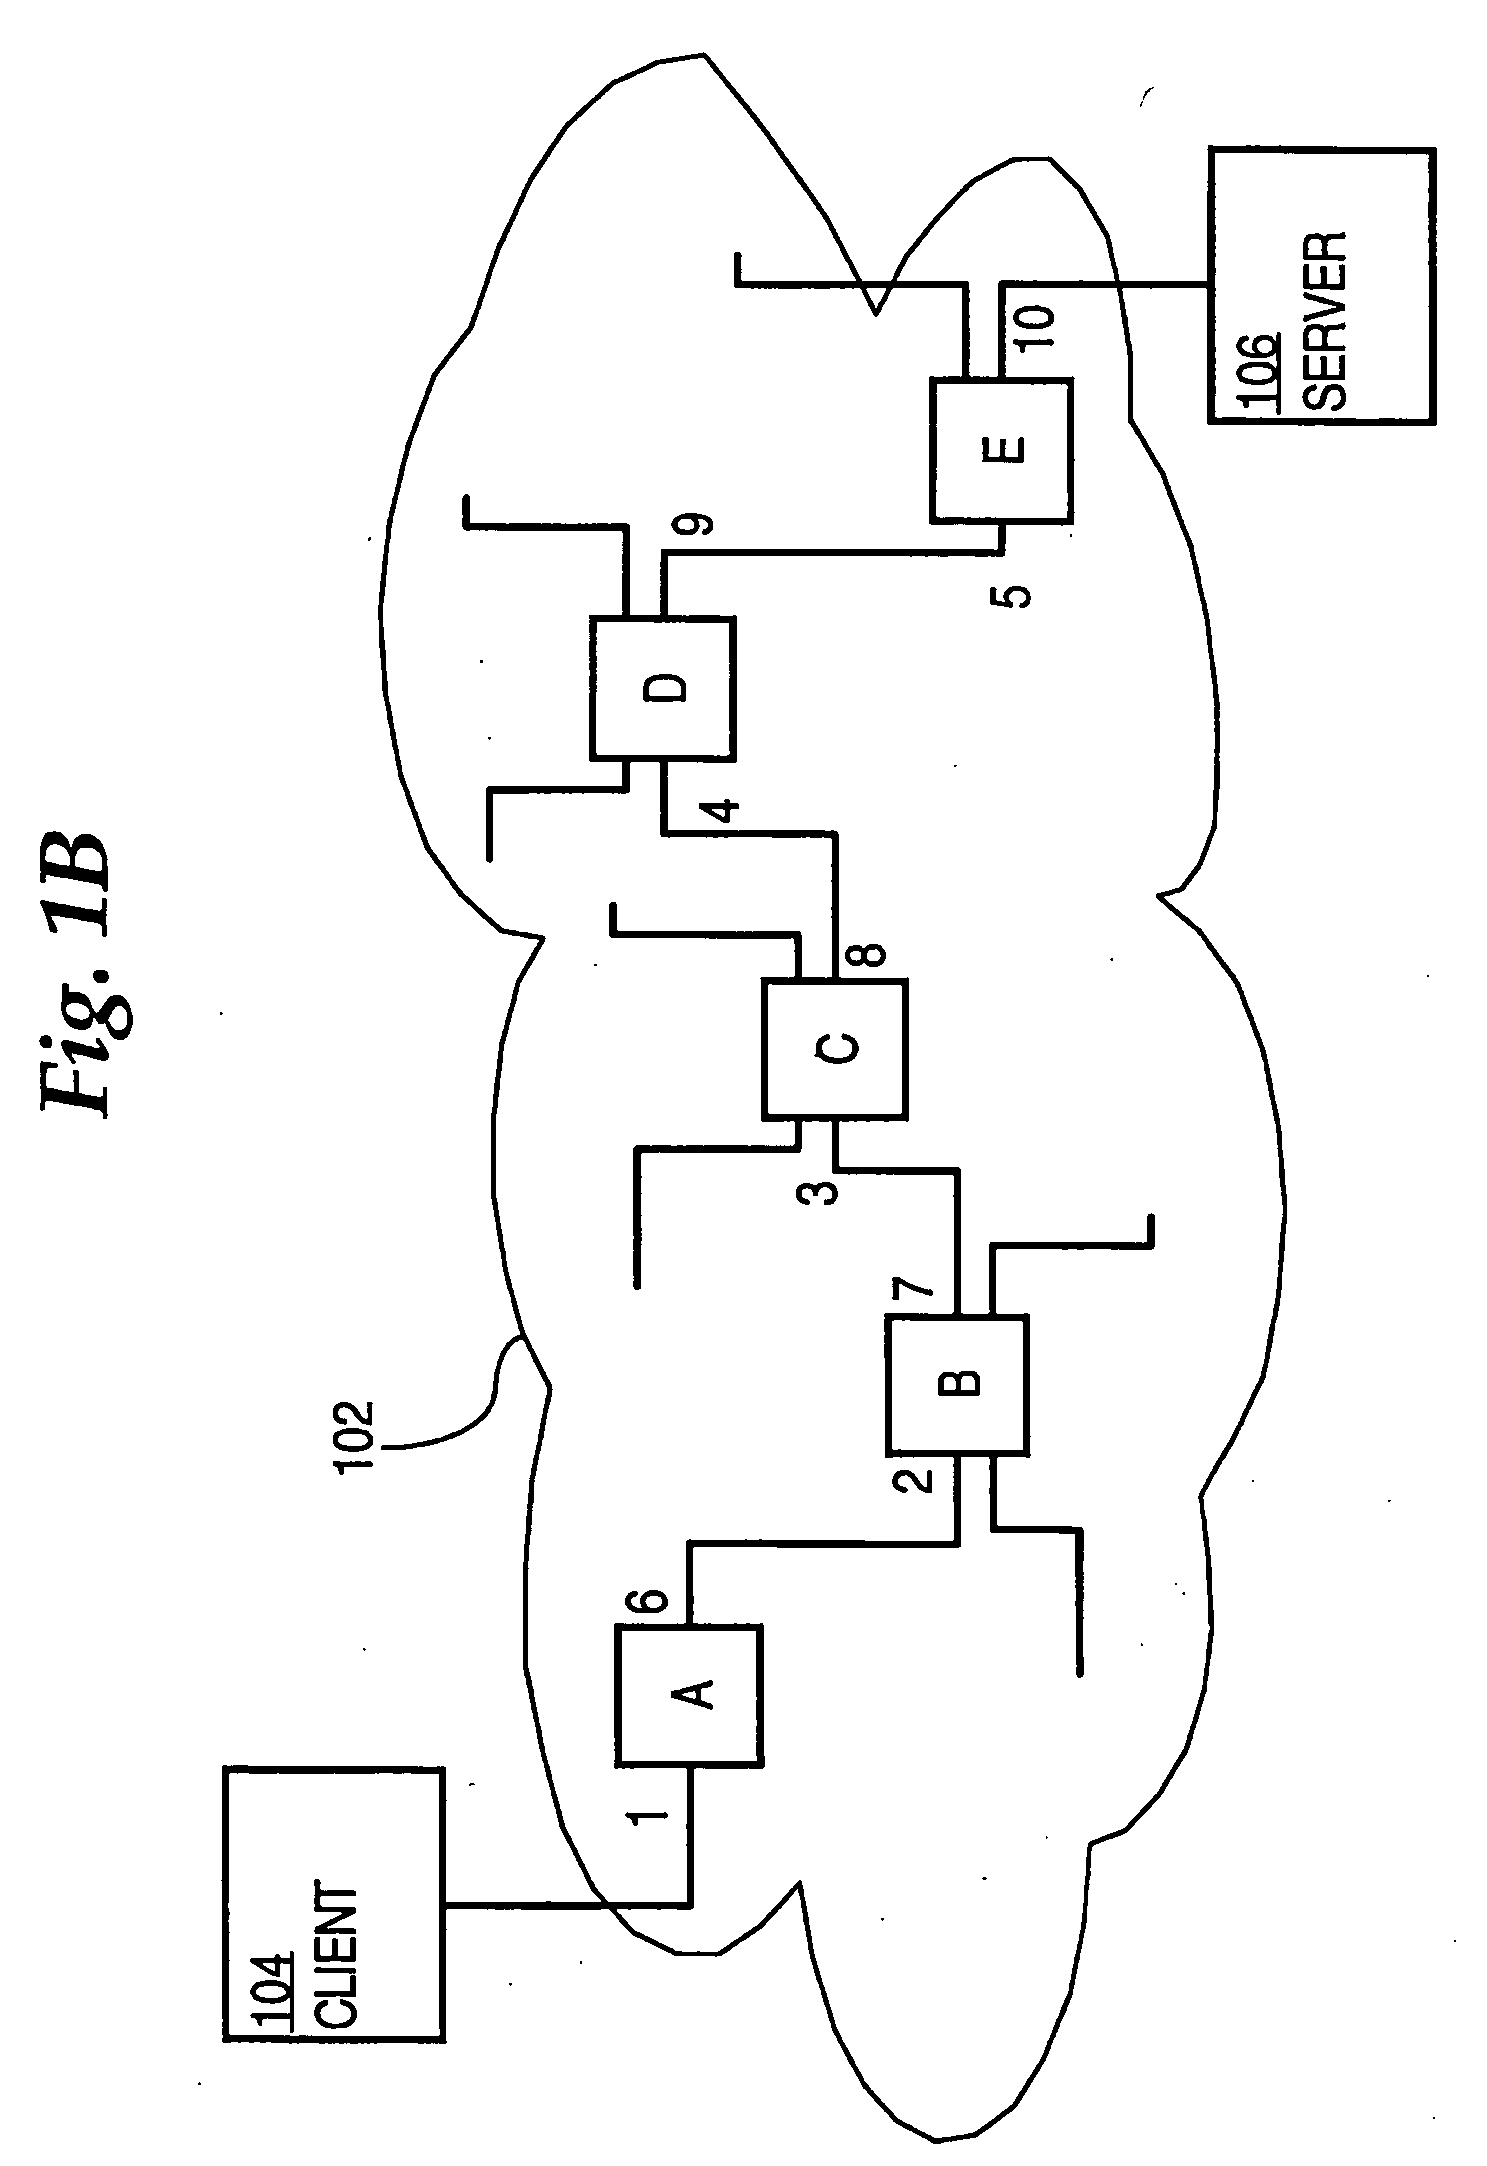 Method providing server affinity and client stickiness in a server load balancing device without TCP termination and without keeping flow states